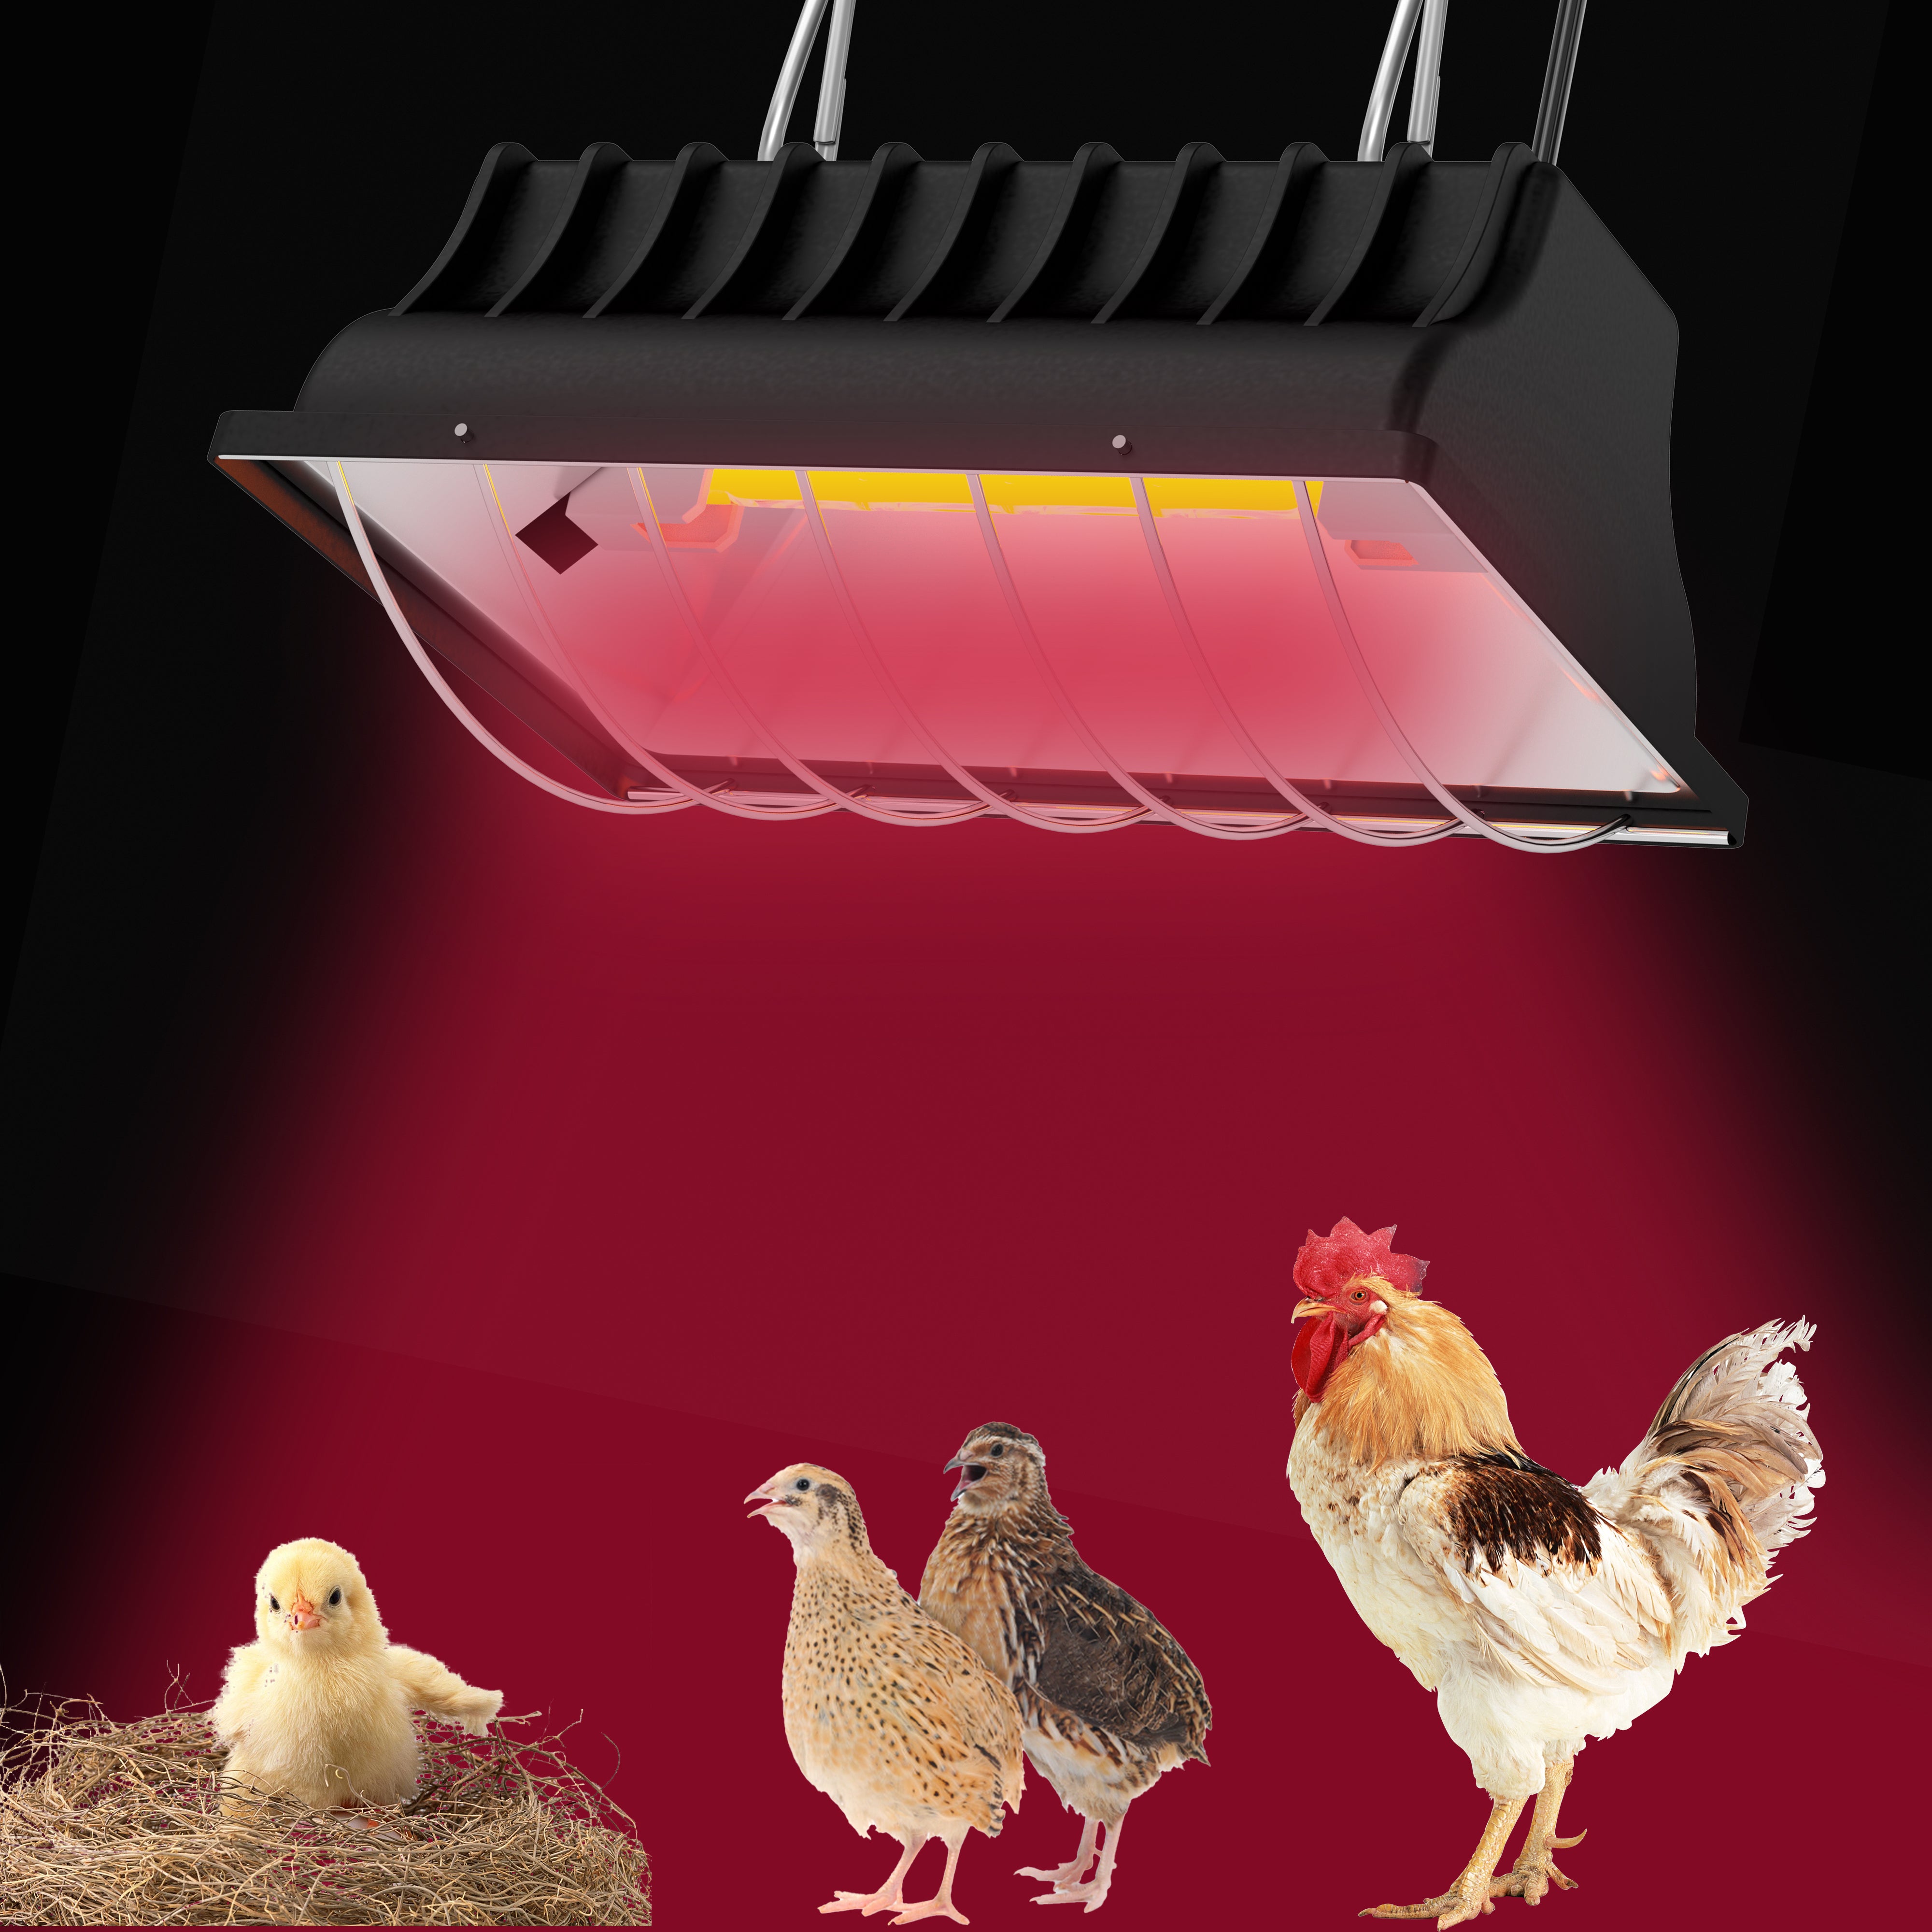 Chicken Coop Heater 250w Chicken Heater Heat Lamp Outdoor Hanging Light Heated with Waterproof and Anti-Fall Aluminum Alloy Lamp Shade